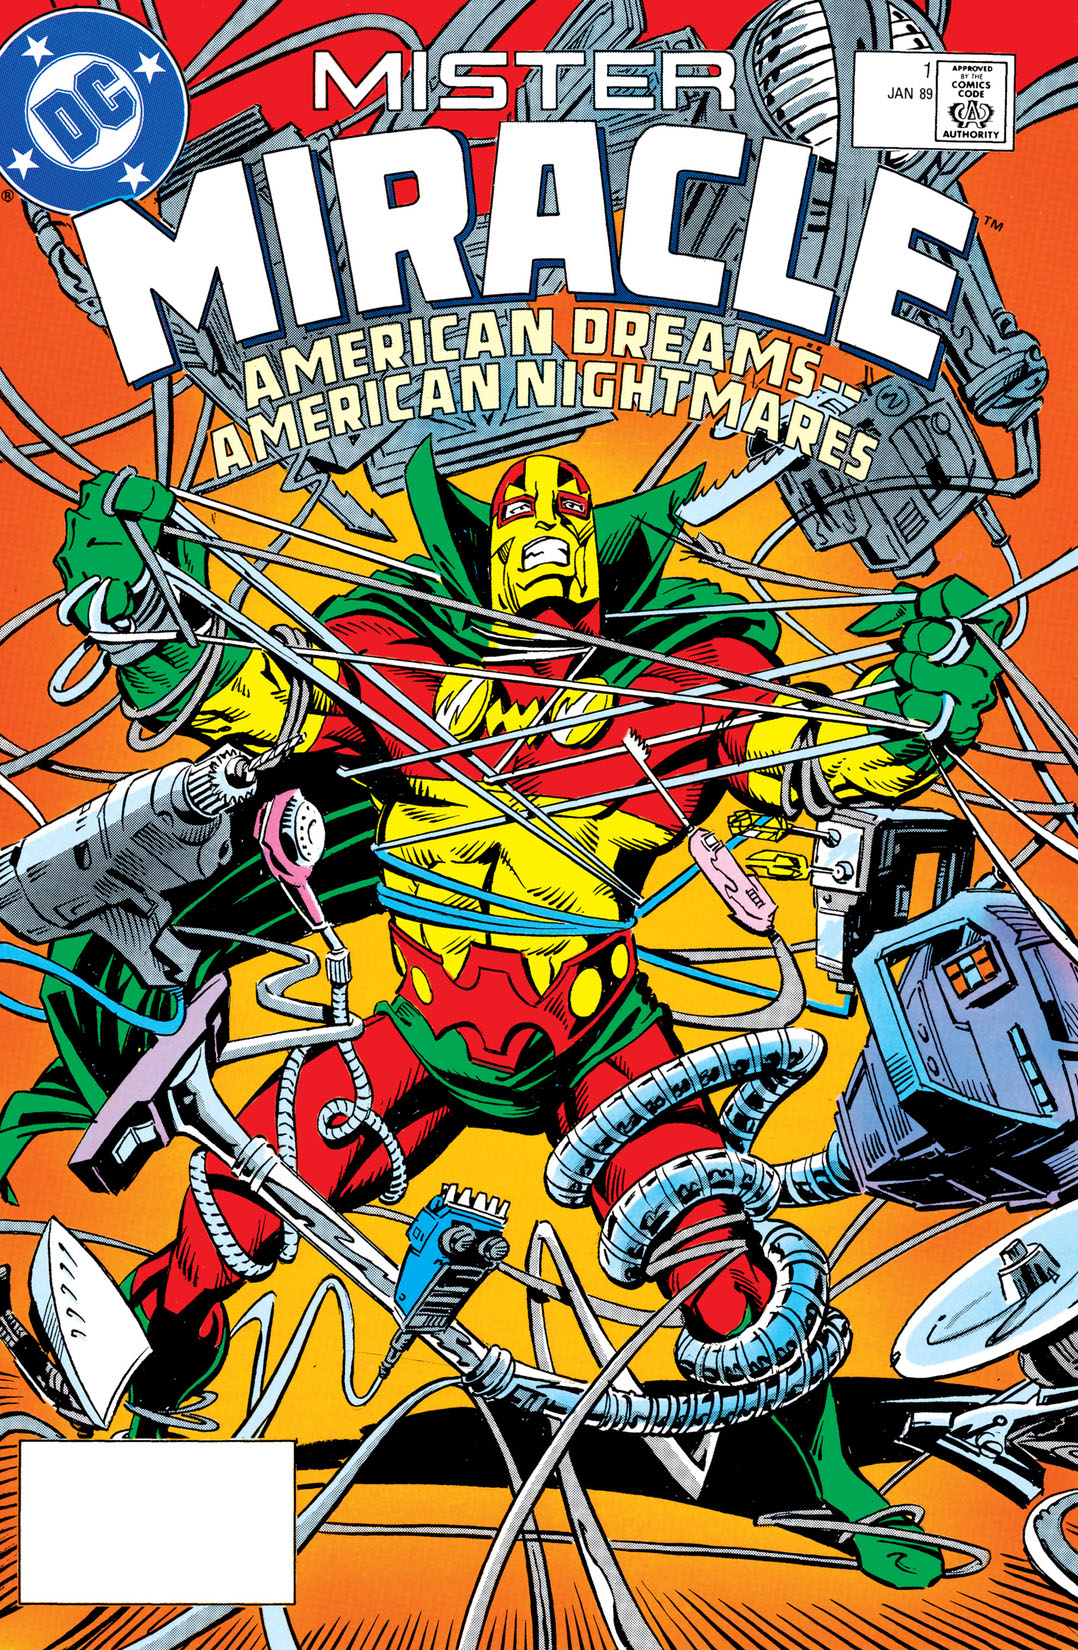 Mister Miracle (1988-) #1 preview images